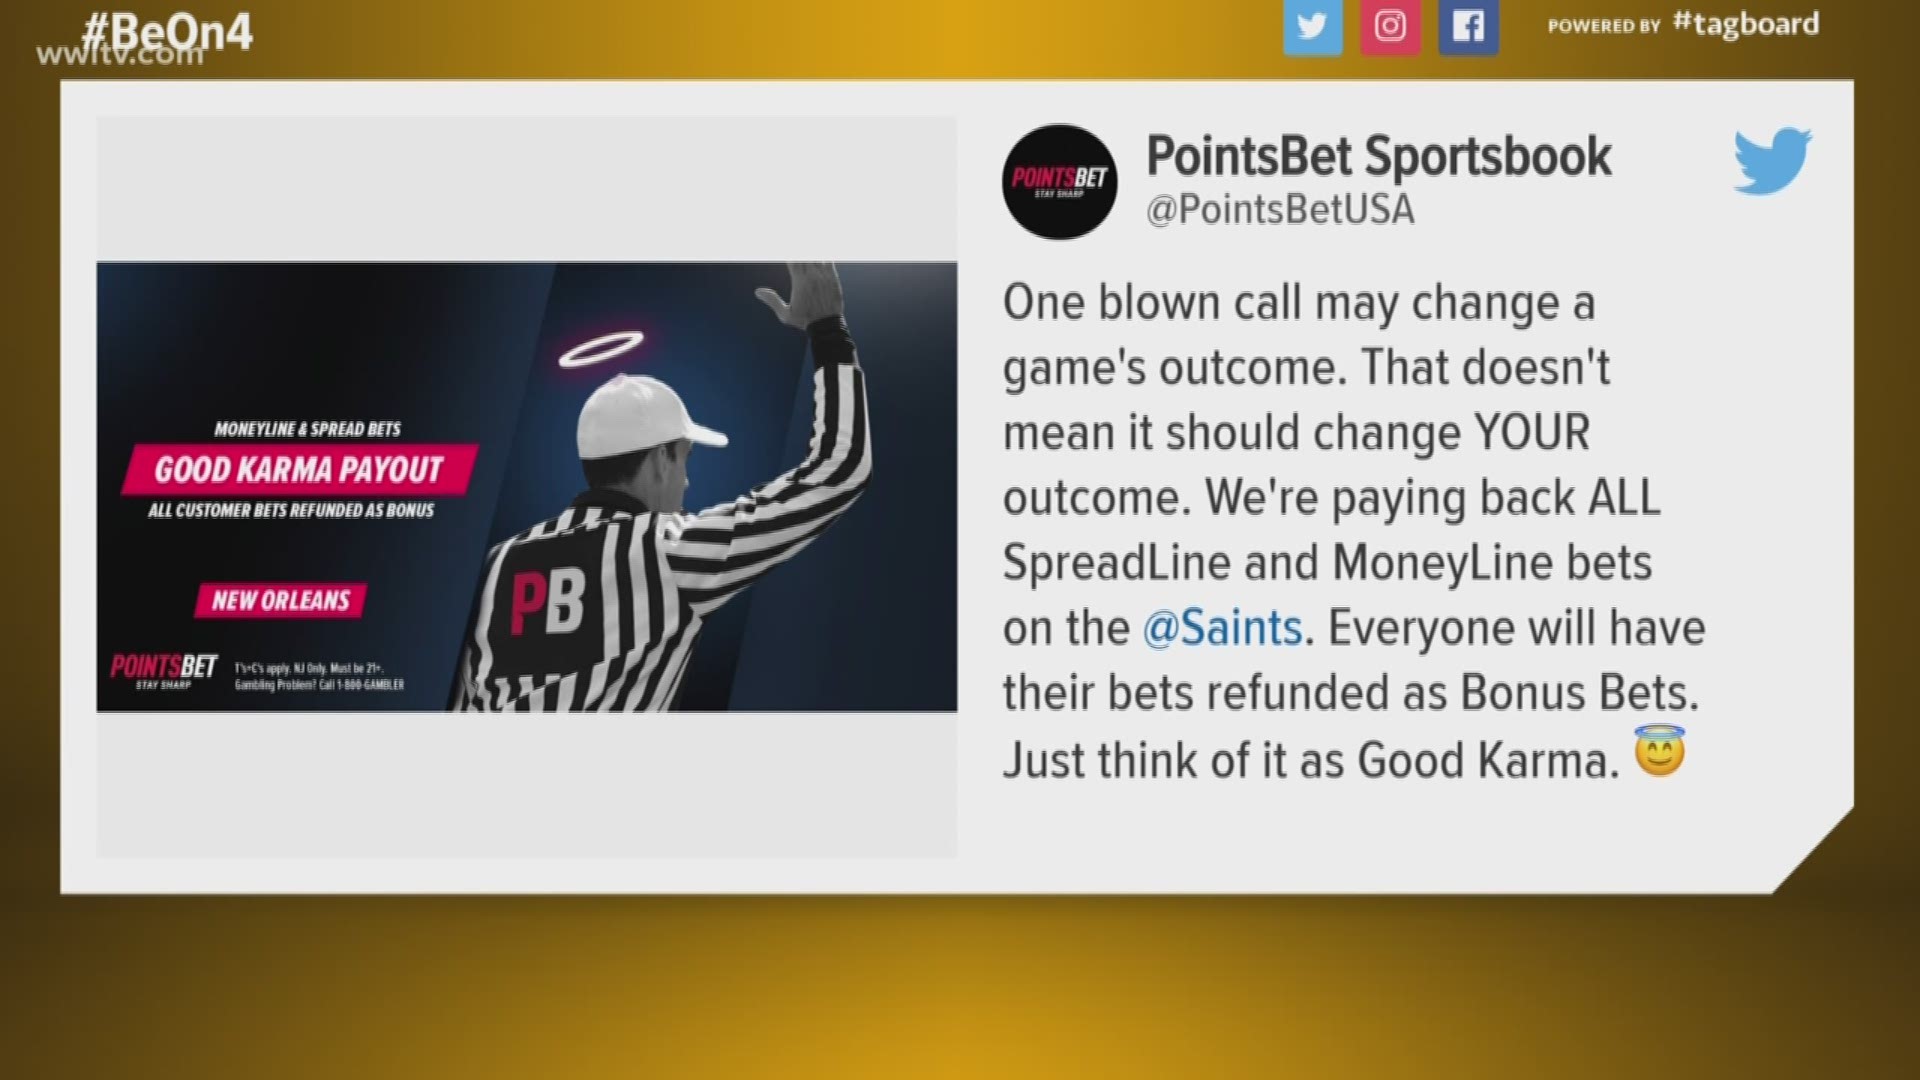 They people who made the bets won't get cash refunds, they have been refunded as bonus bets.